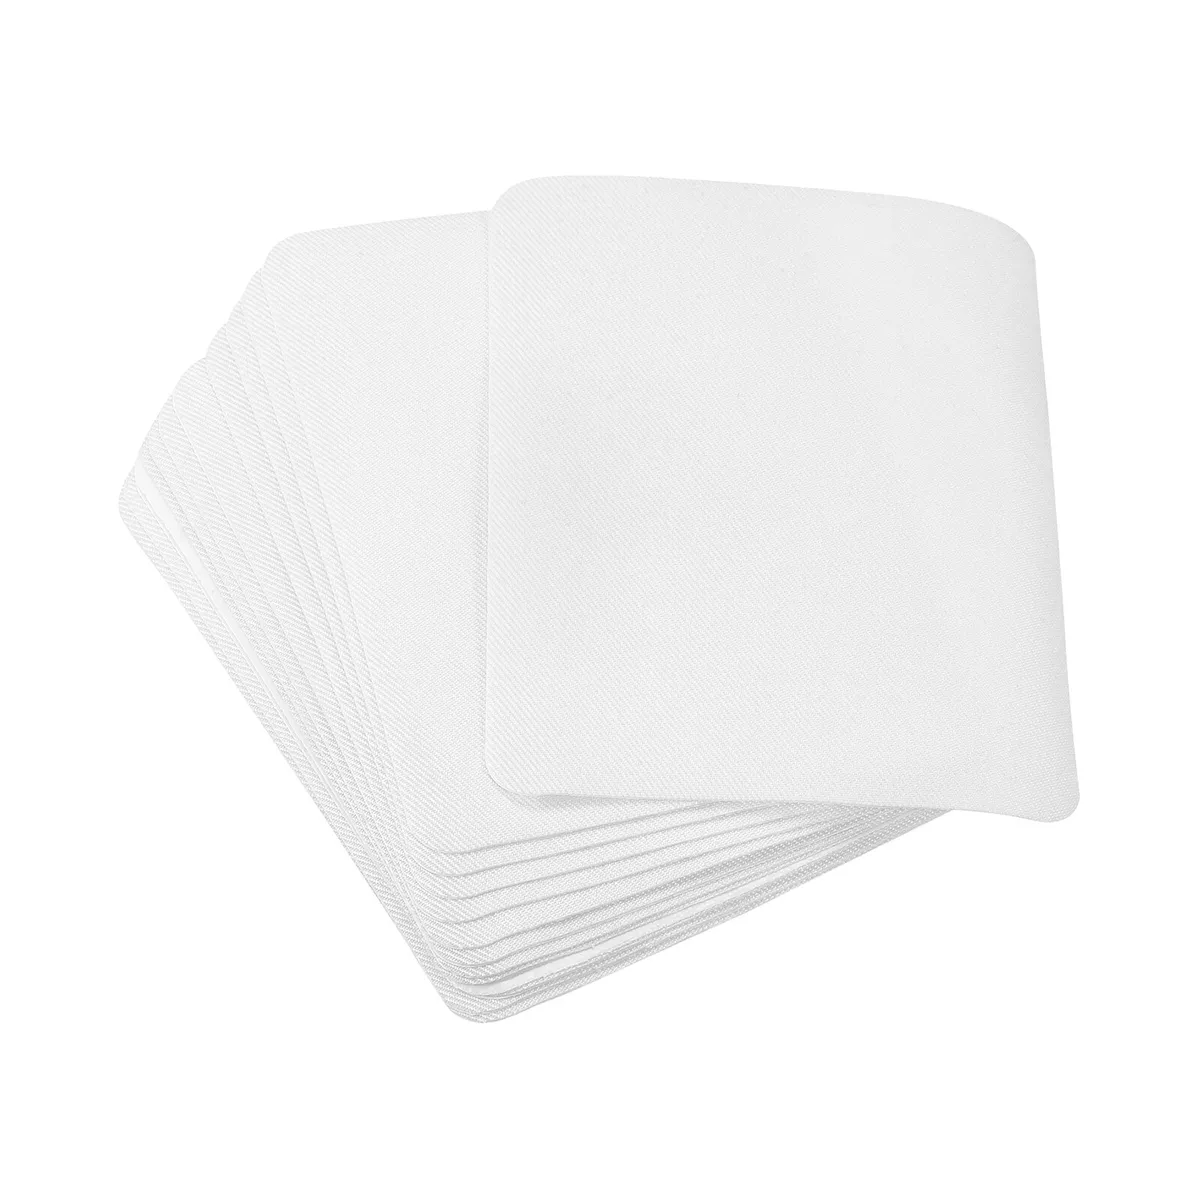 Fabric Patch Iron-on Patches White 4.9x3.7 for Clothes Pack of 12